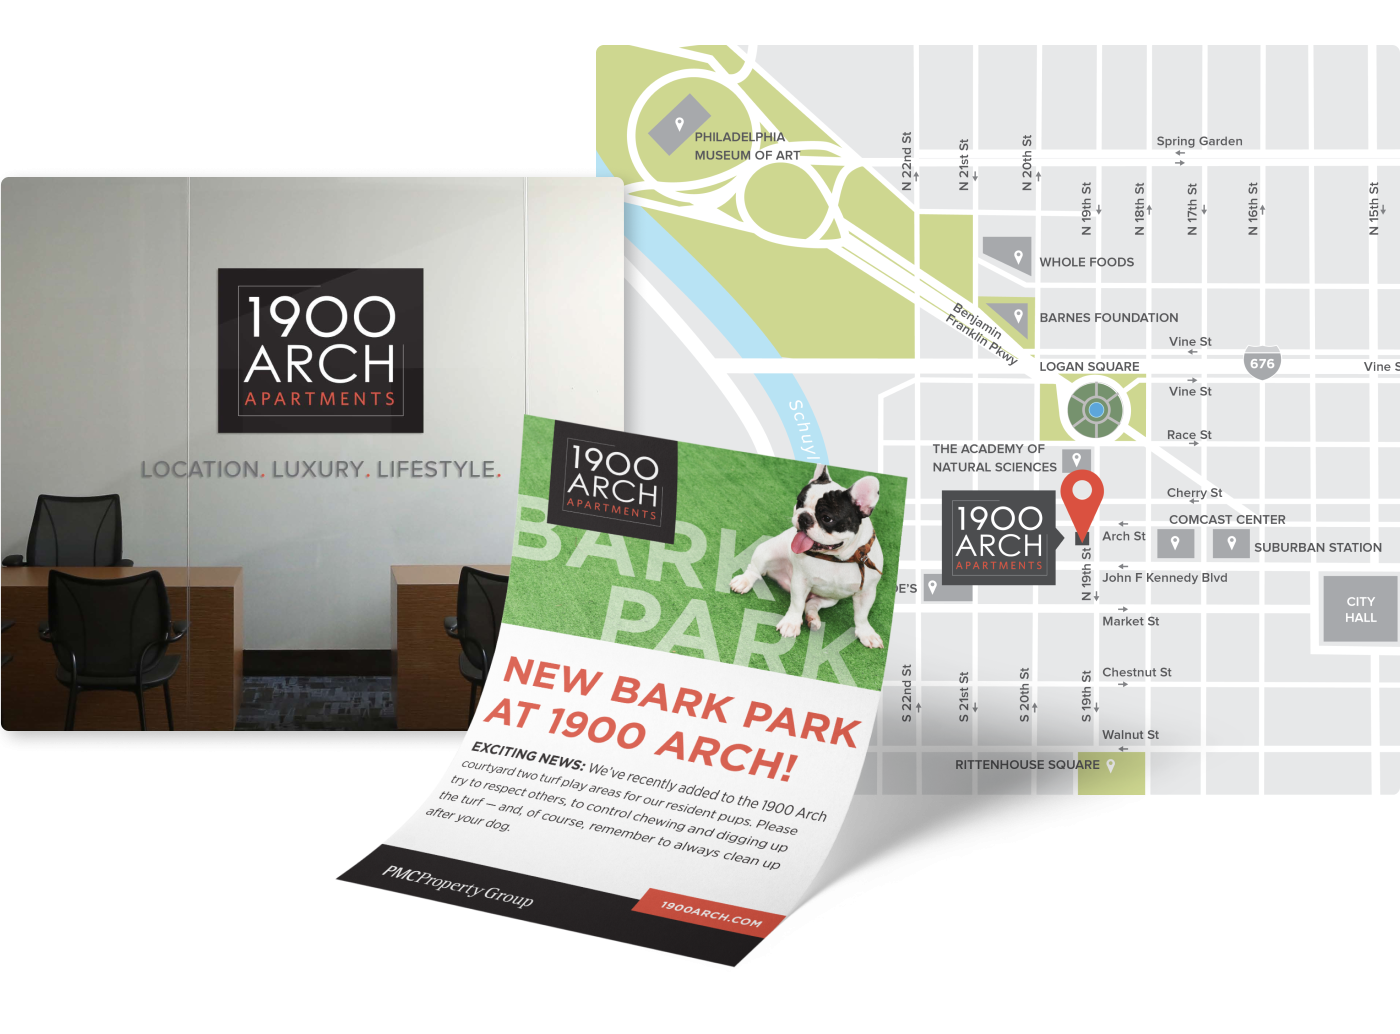 Collage of branding created for the 1900 Arch property's dog park called Bark Park on a flyer, map, and signage.